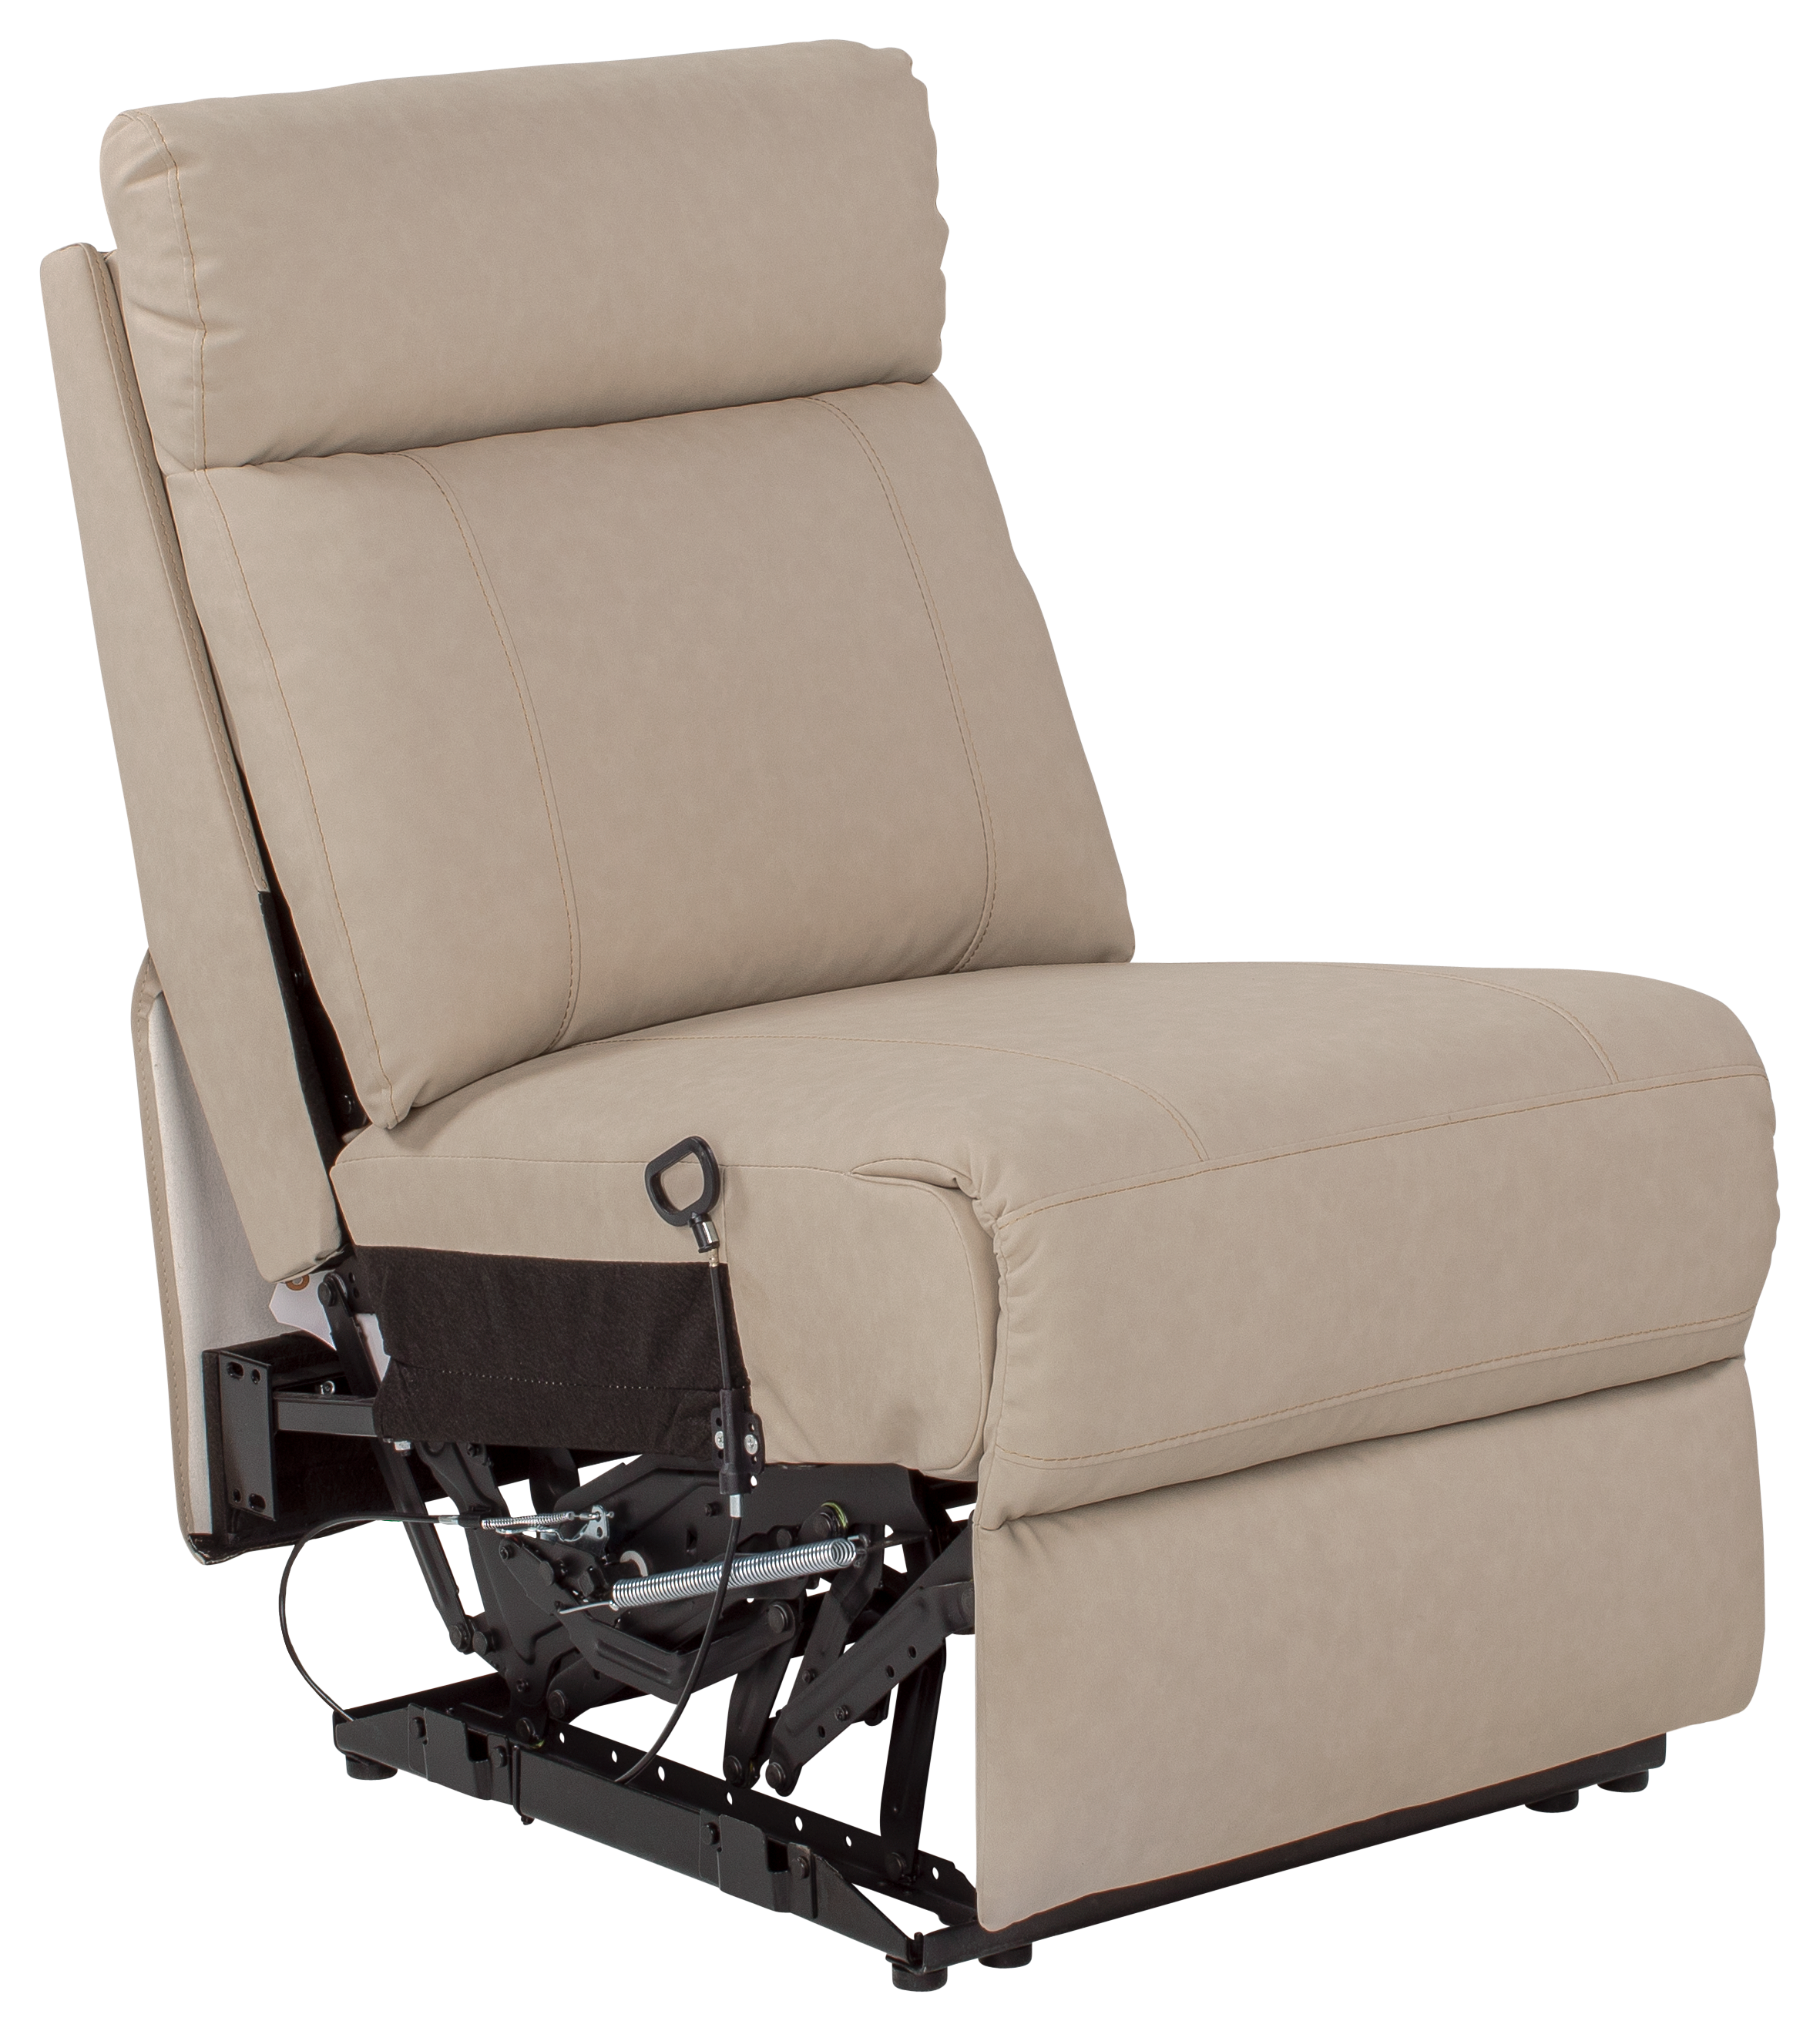 Thomas Payne Altoona RV Furniture Collection Heritage Series Armless Recliner